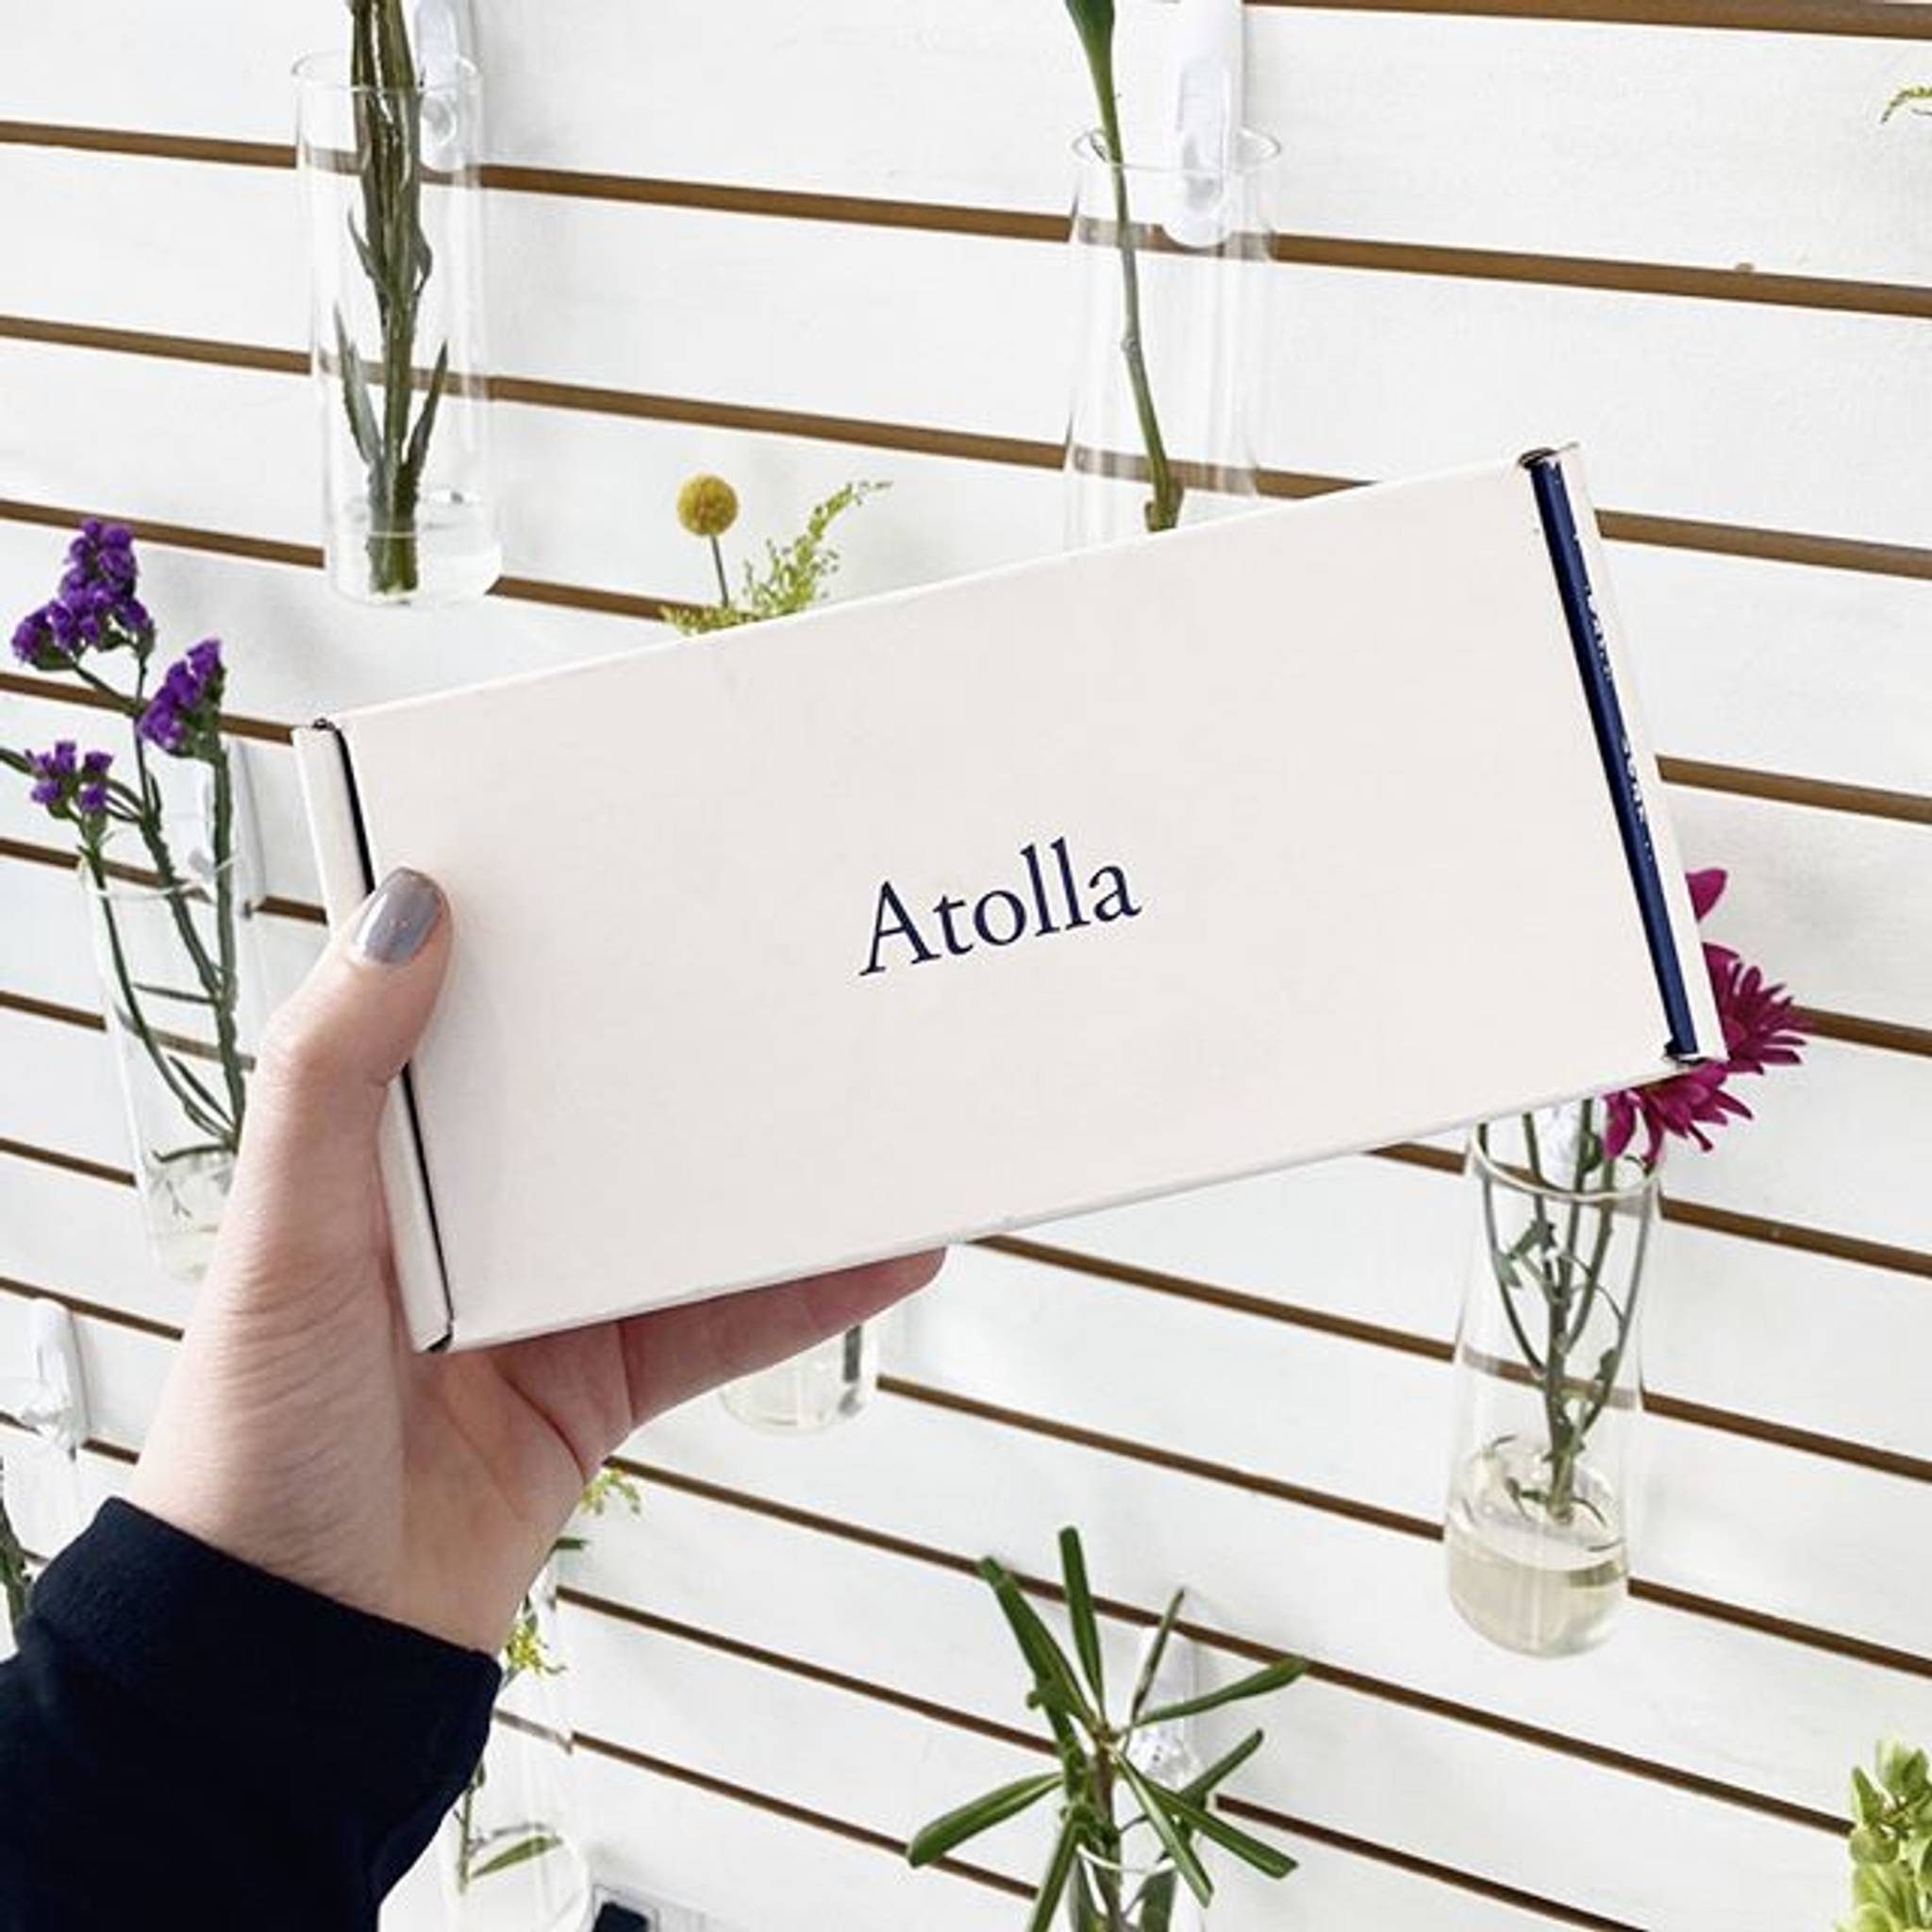 Atolla taps bespoke skincare products with AI